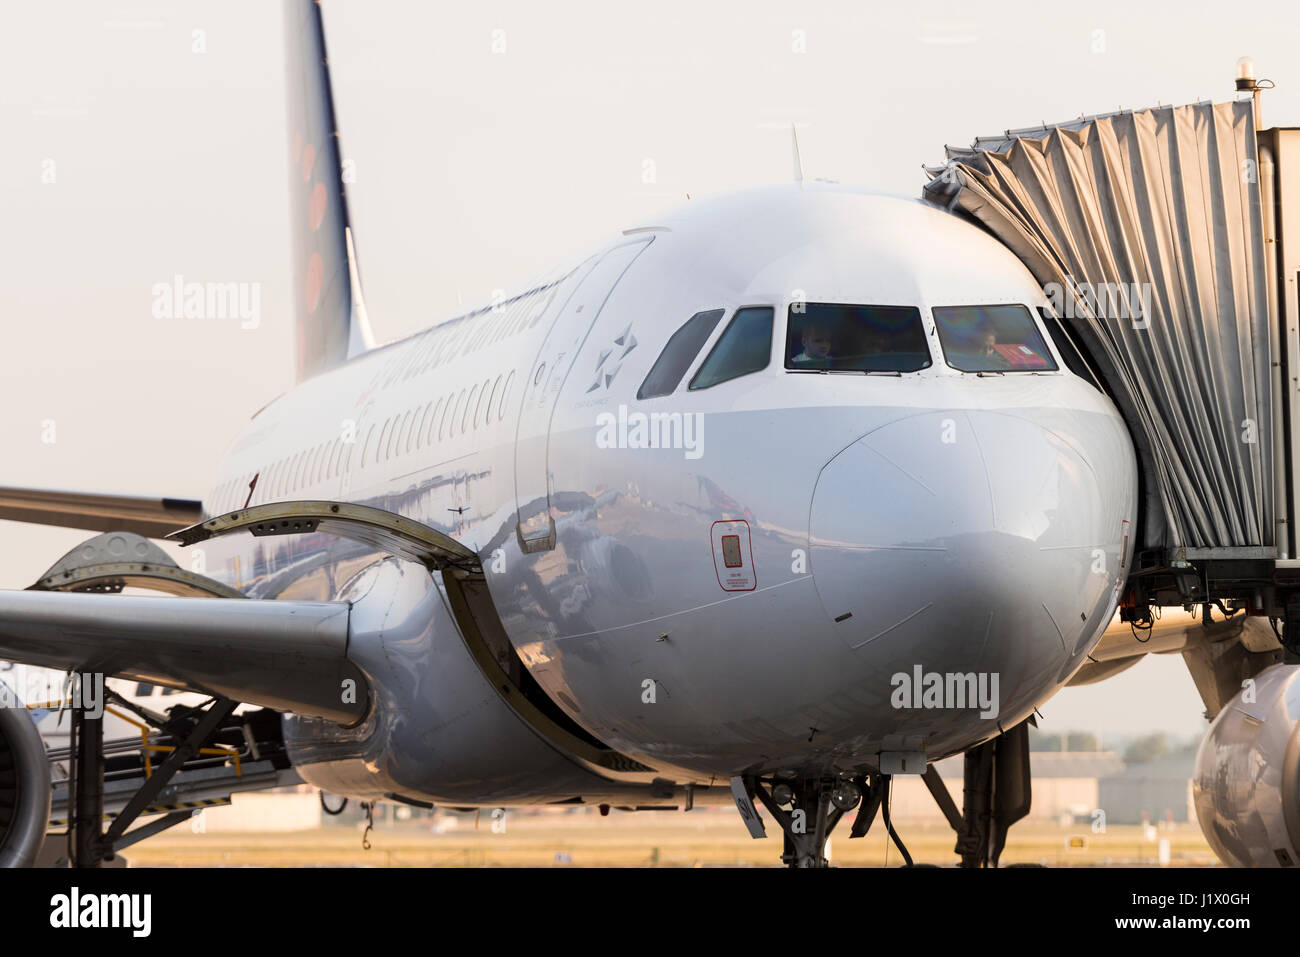 Brussels Airlines Airbus at brussels airport Stock Photo